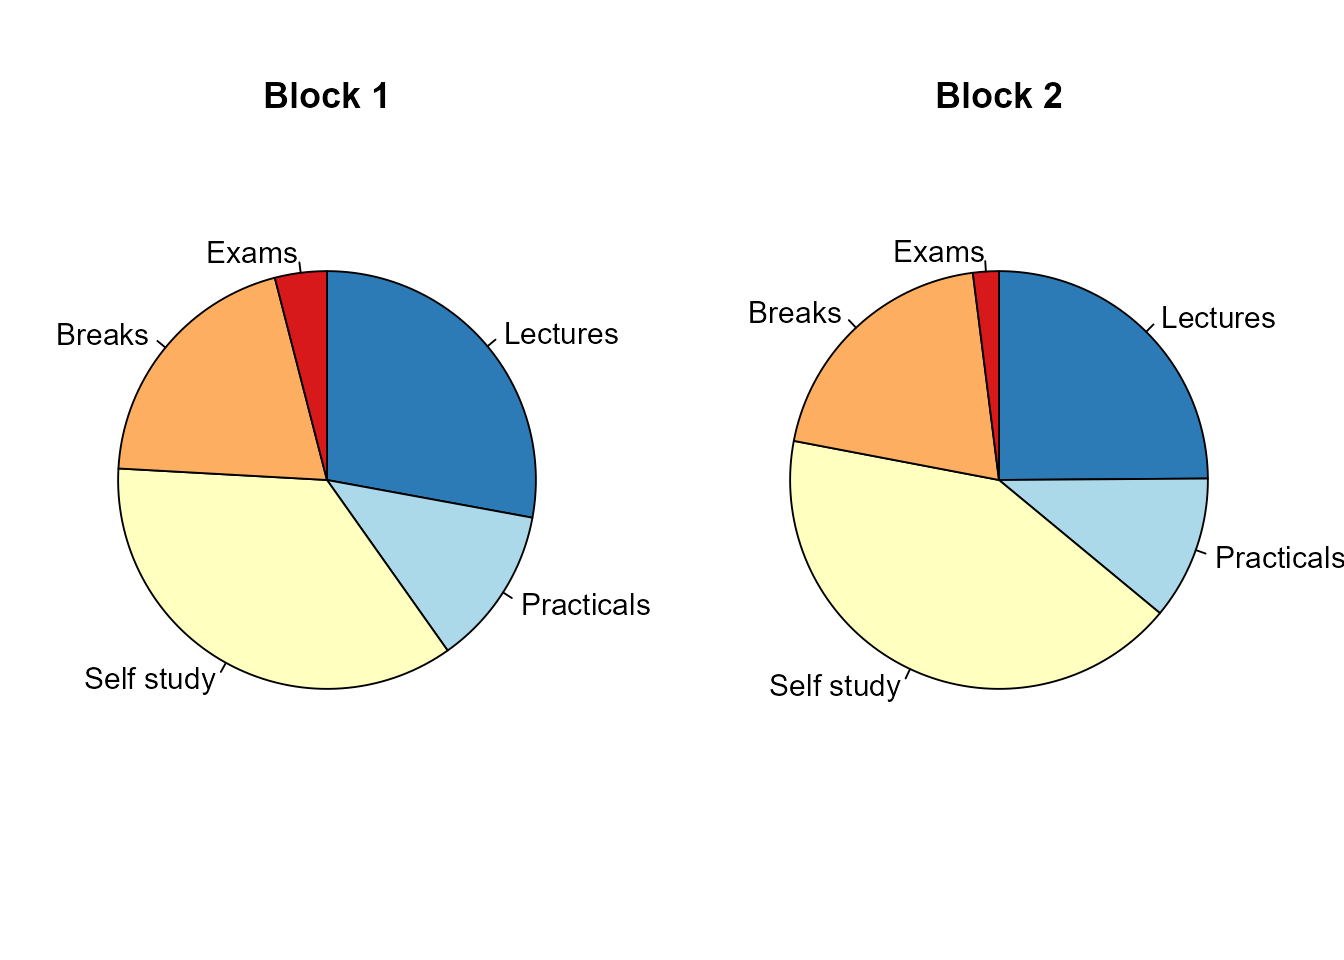 Breakdown of the total study time in the first two blocks as a biology bachelor student at Leiden University. Data collected from the schedule of the first 17 weeks of the cohort of 2020--2021.